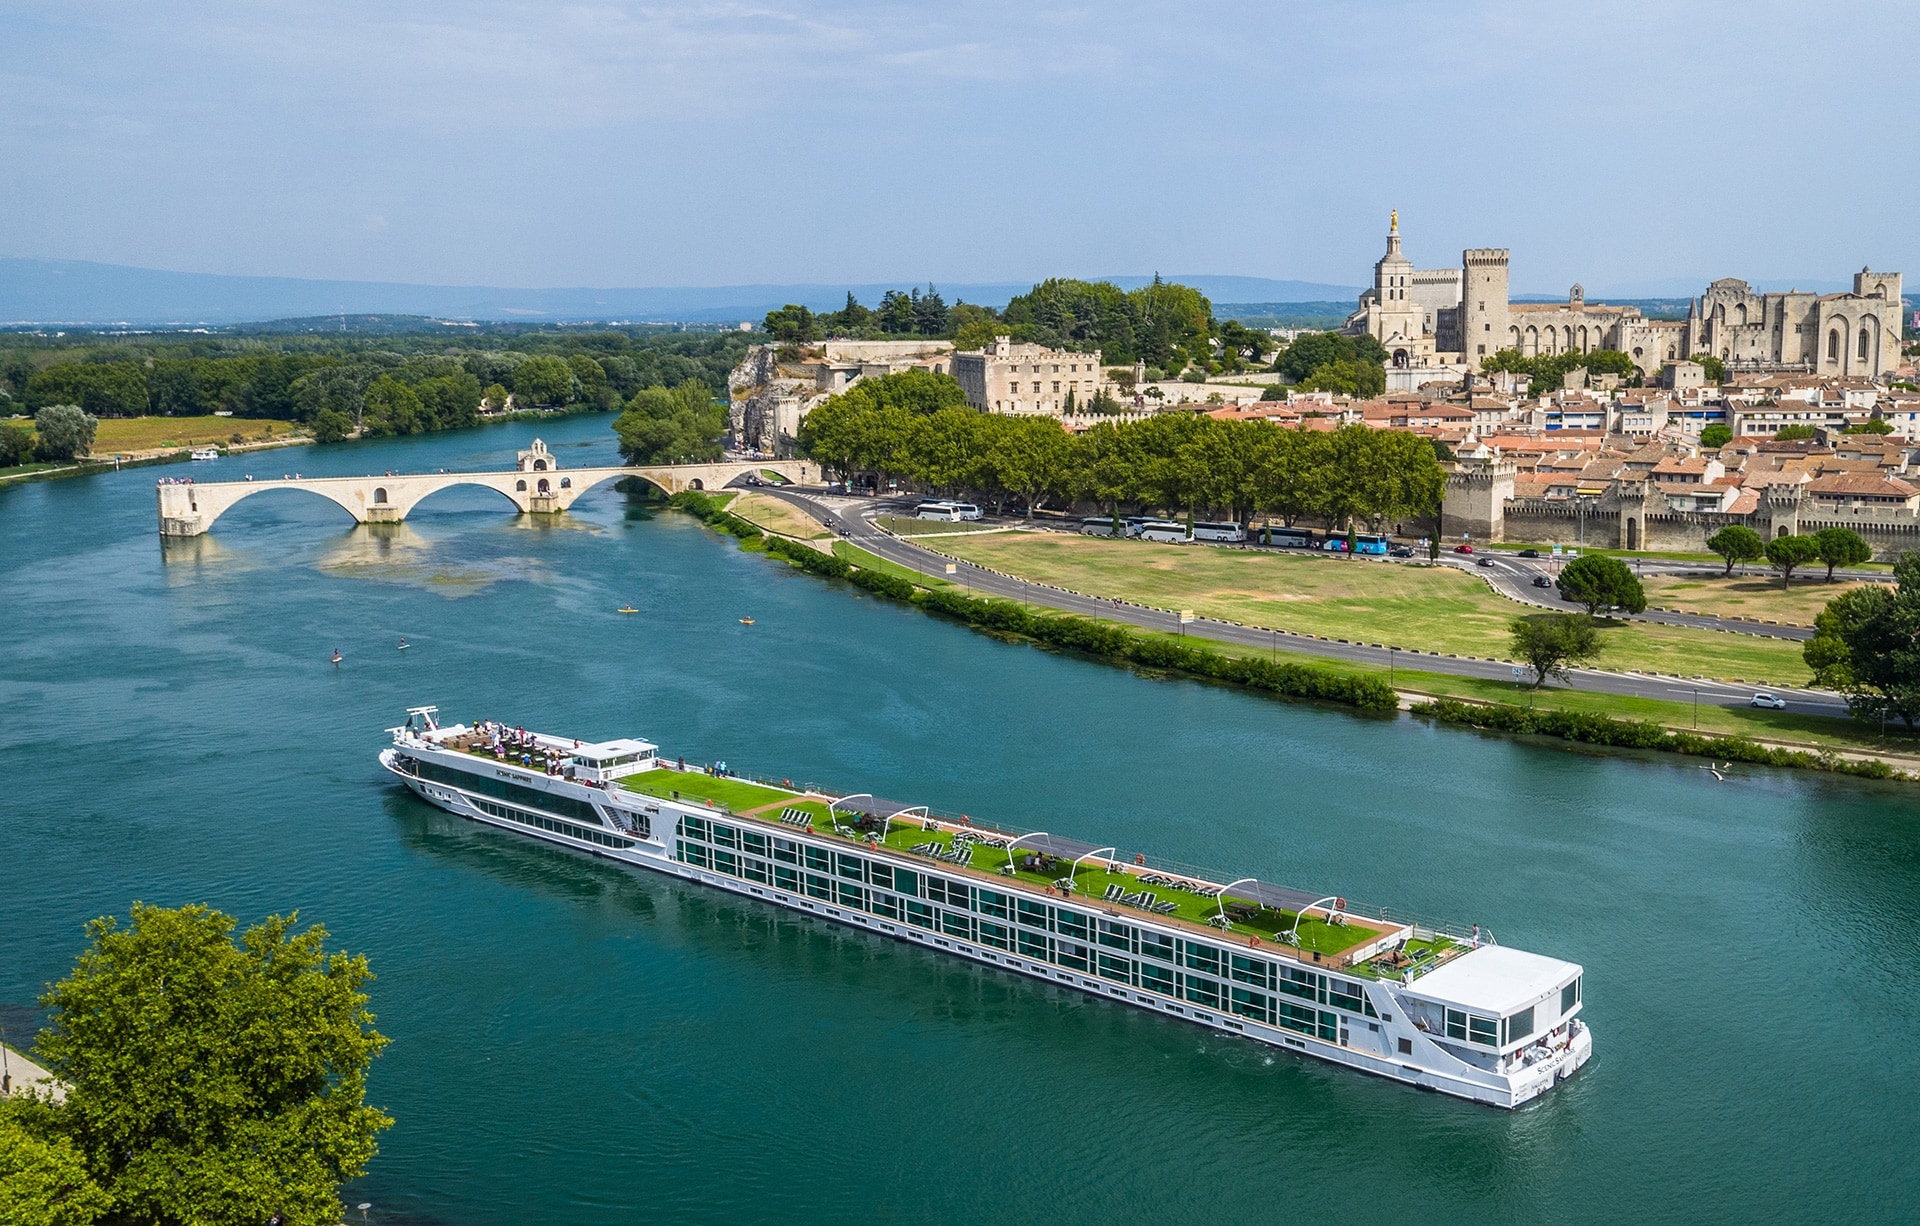 The Rhone River, Luxurious cruise, Explore France, Leisurely travel, 1920x1230 HD Desktop